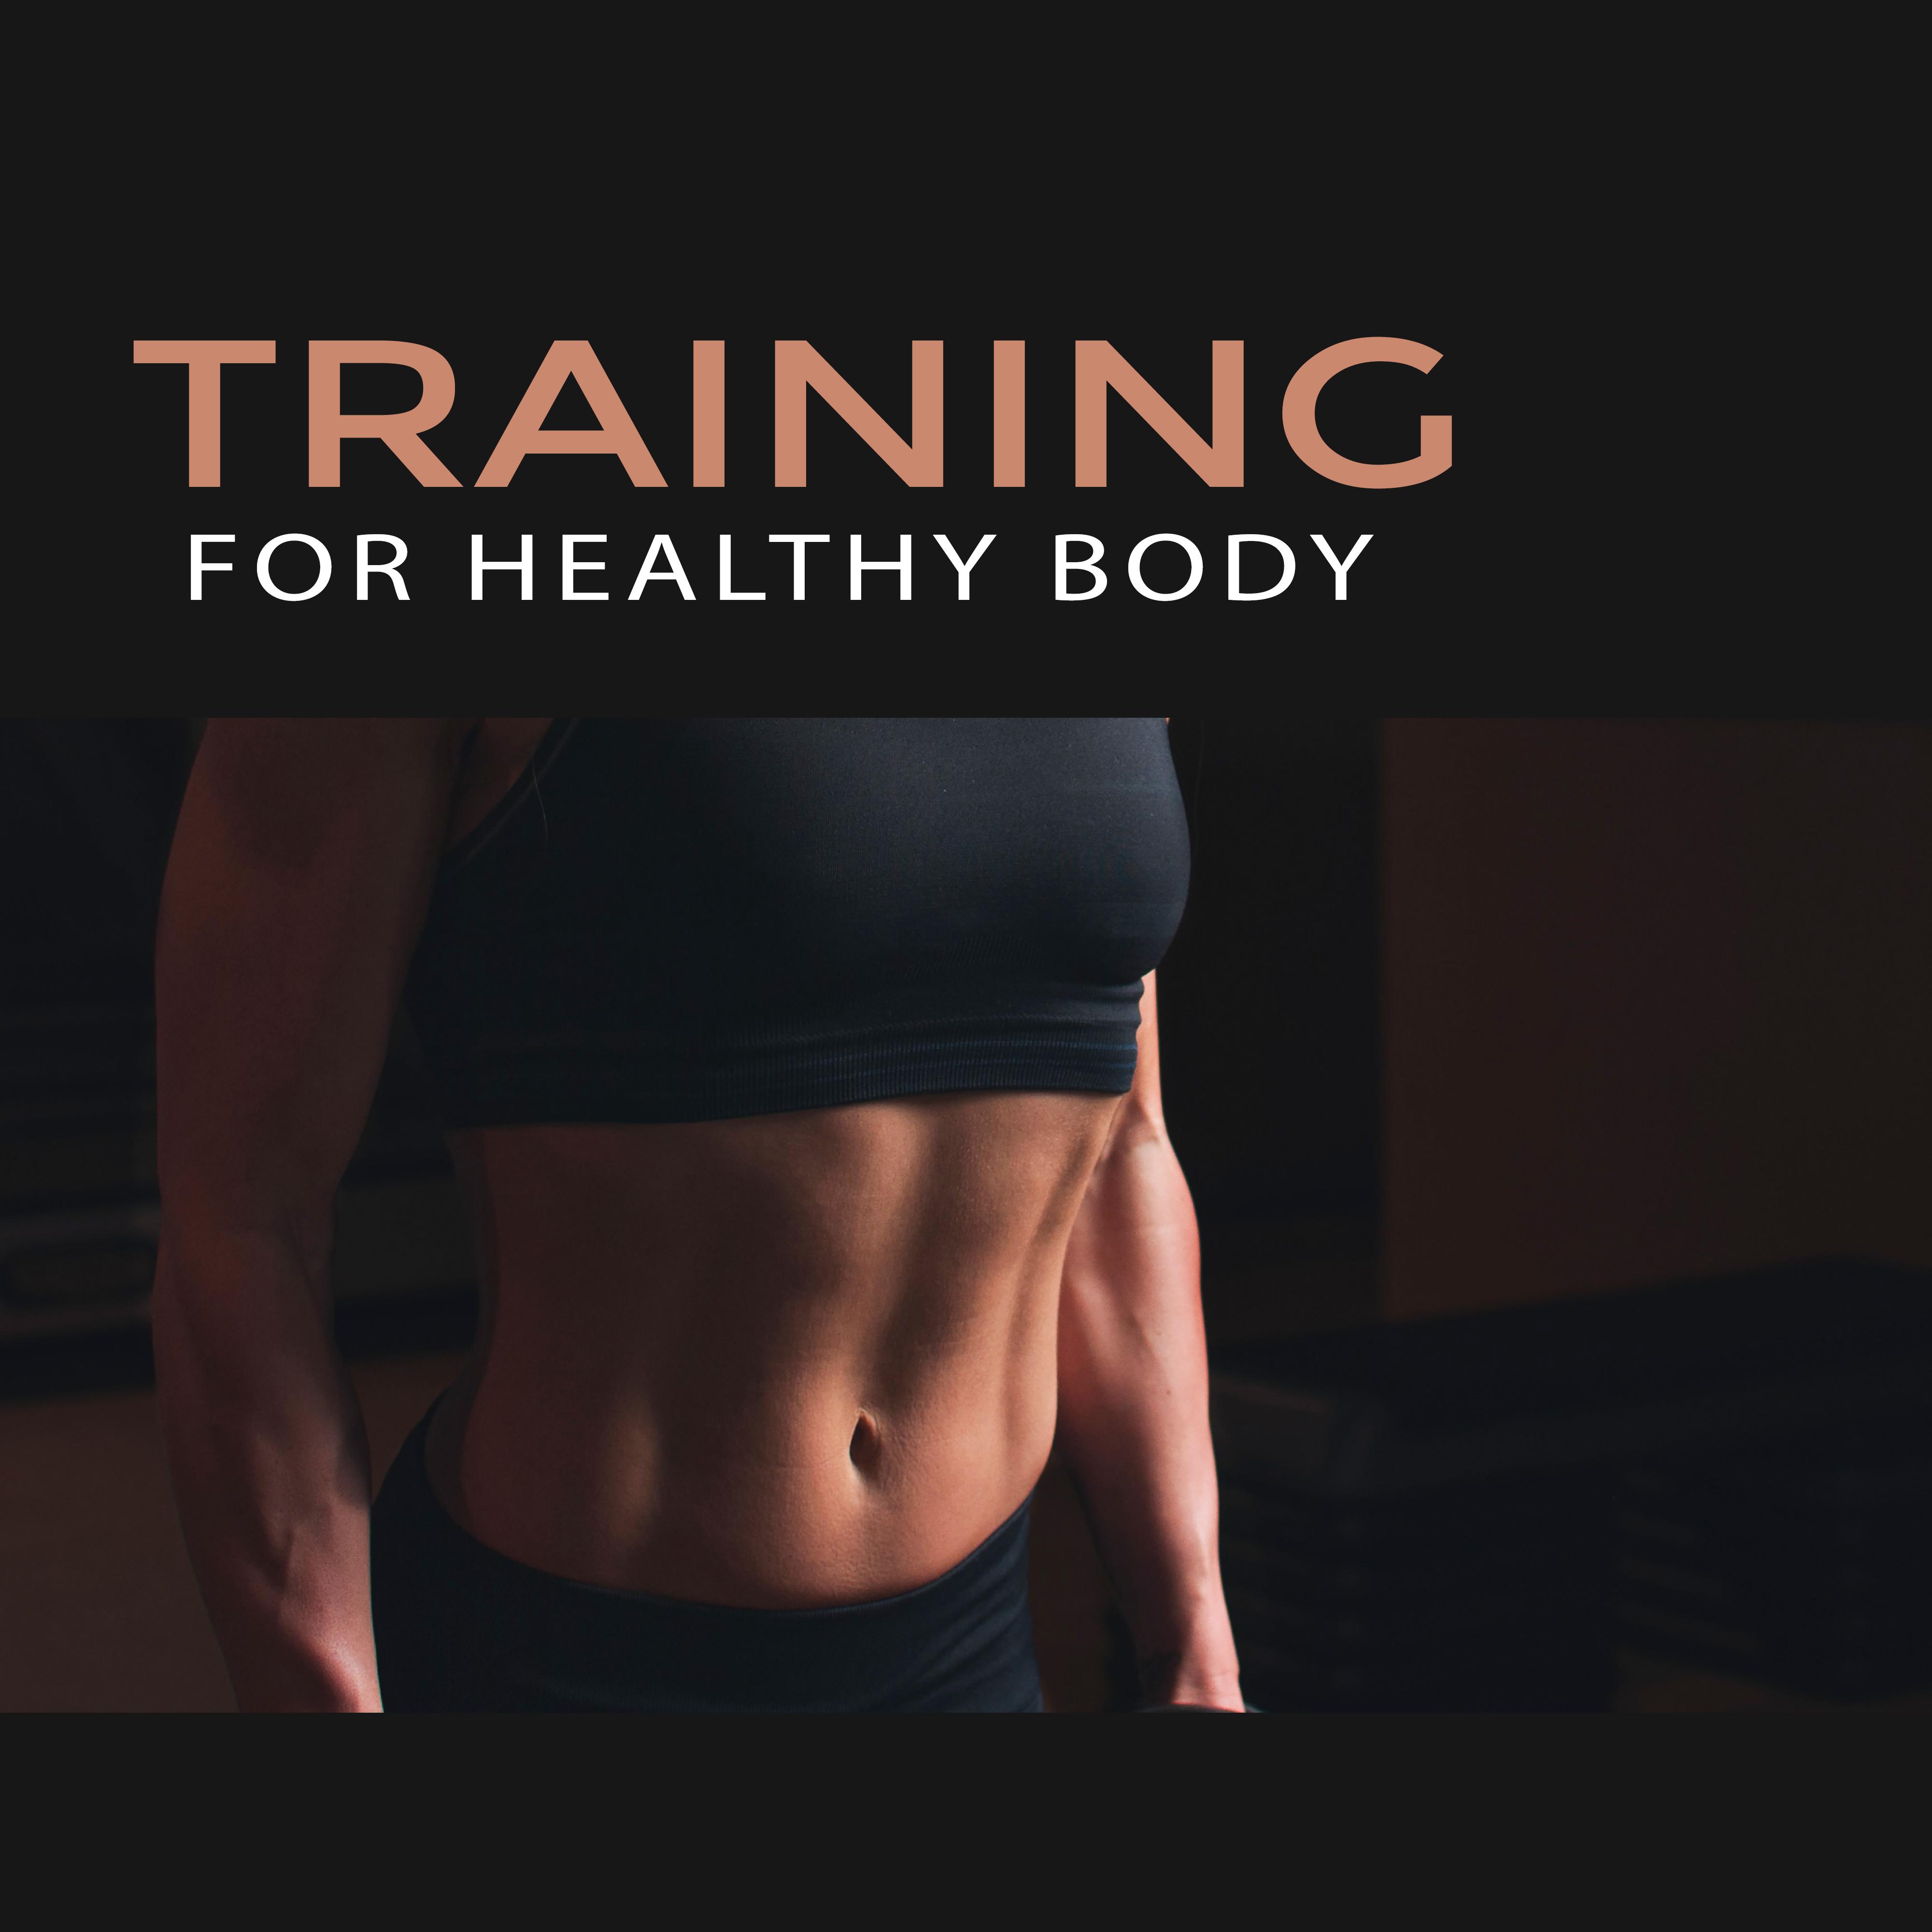 Training for Healthy Body – Music for Fitness, Gym, Running Hits, Workout Music, Peaceful Mind